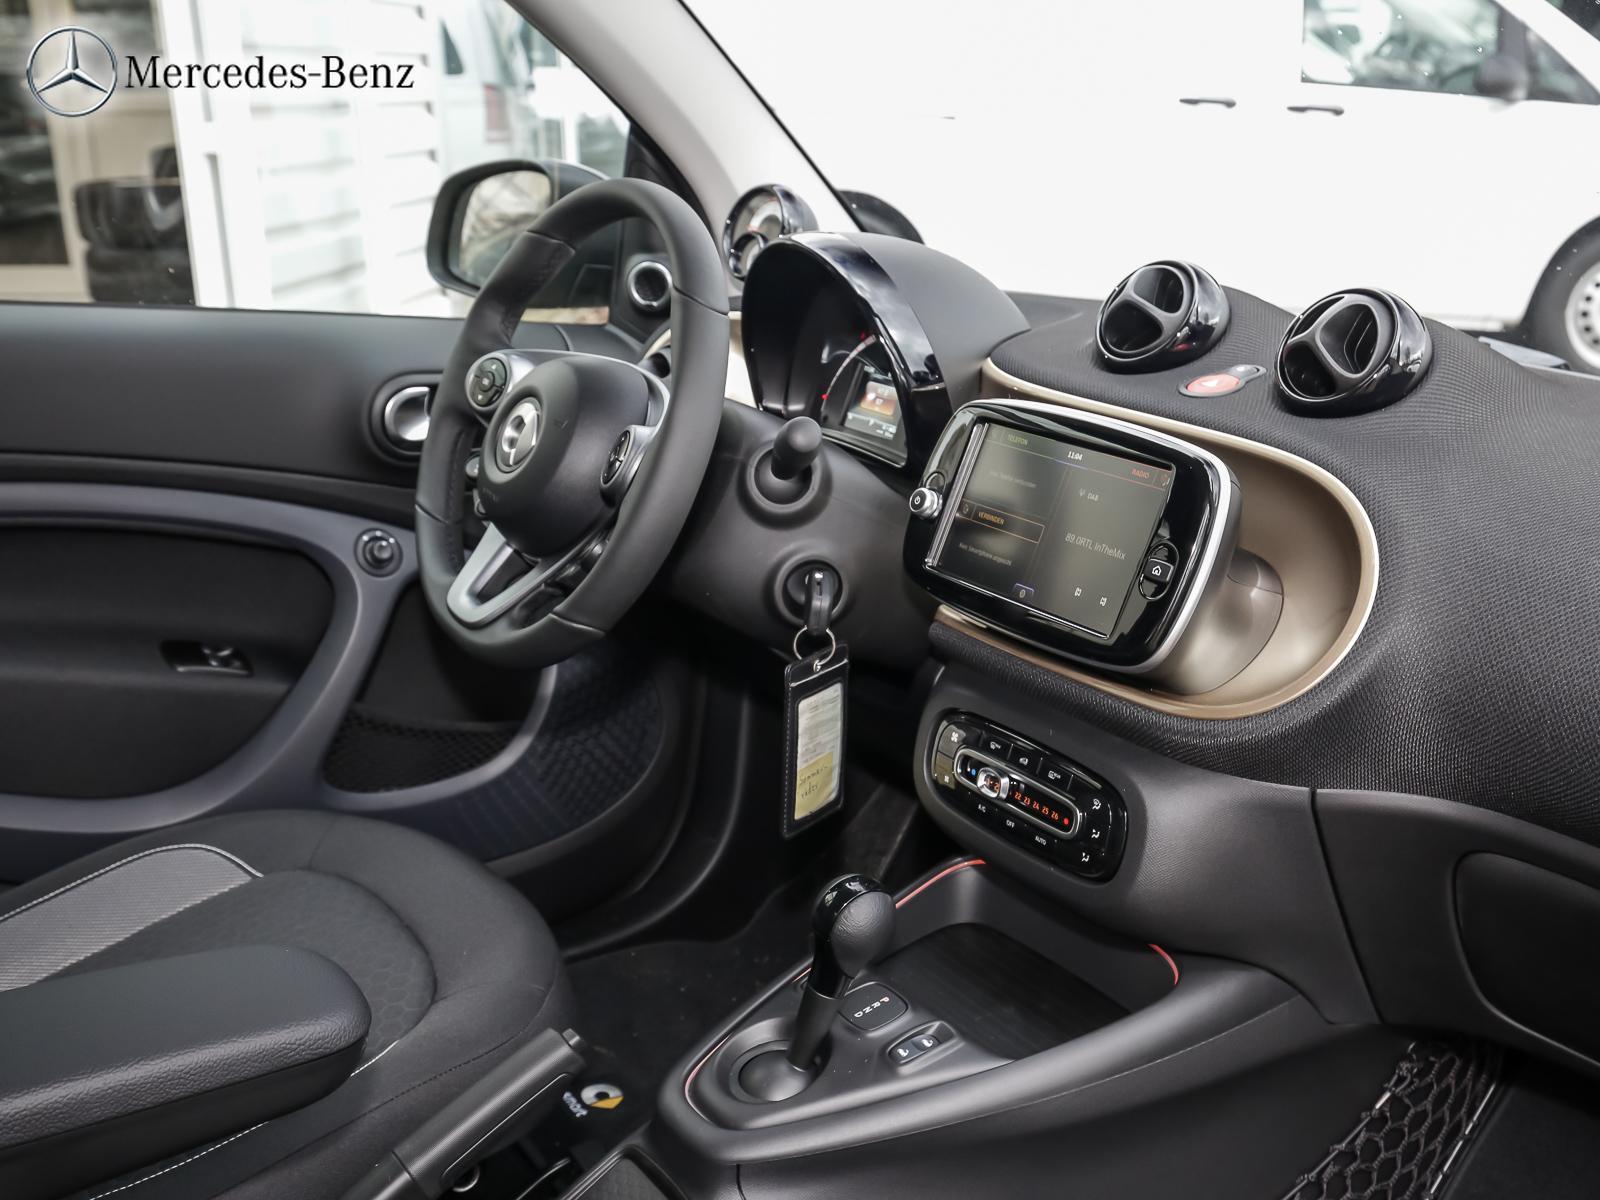 Smart Fortwo EQ cabriolet Millesime2021 Exclusive/JBL 